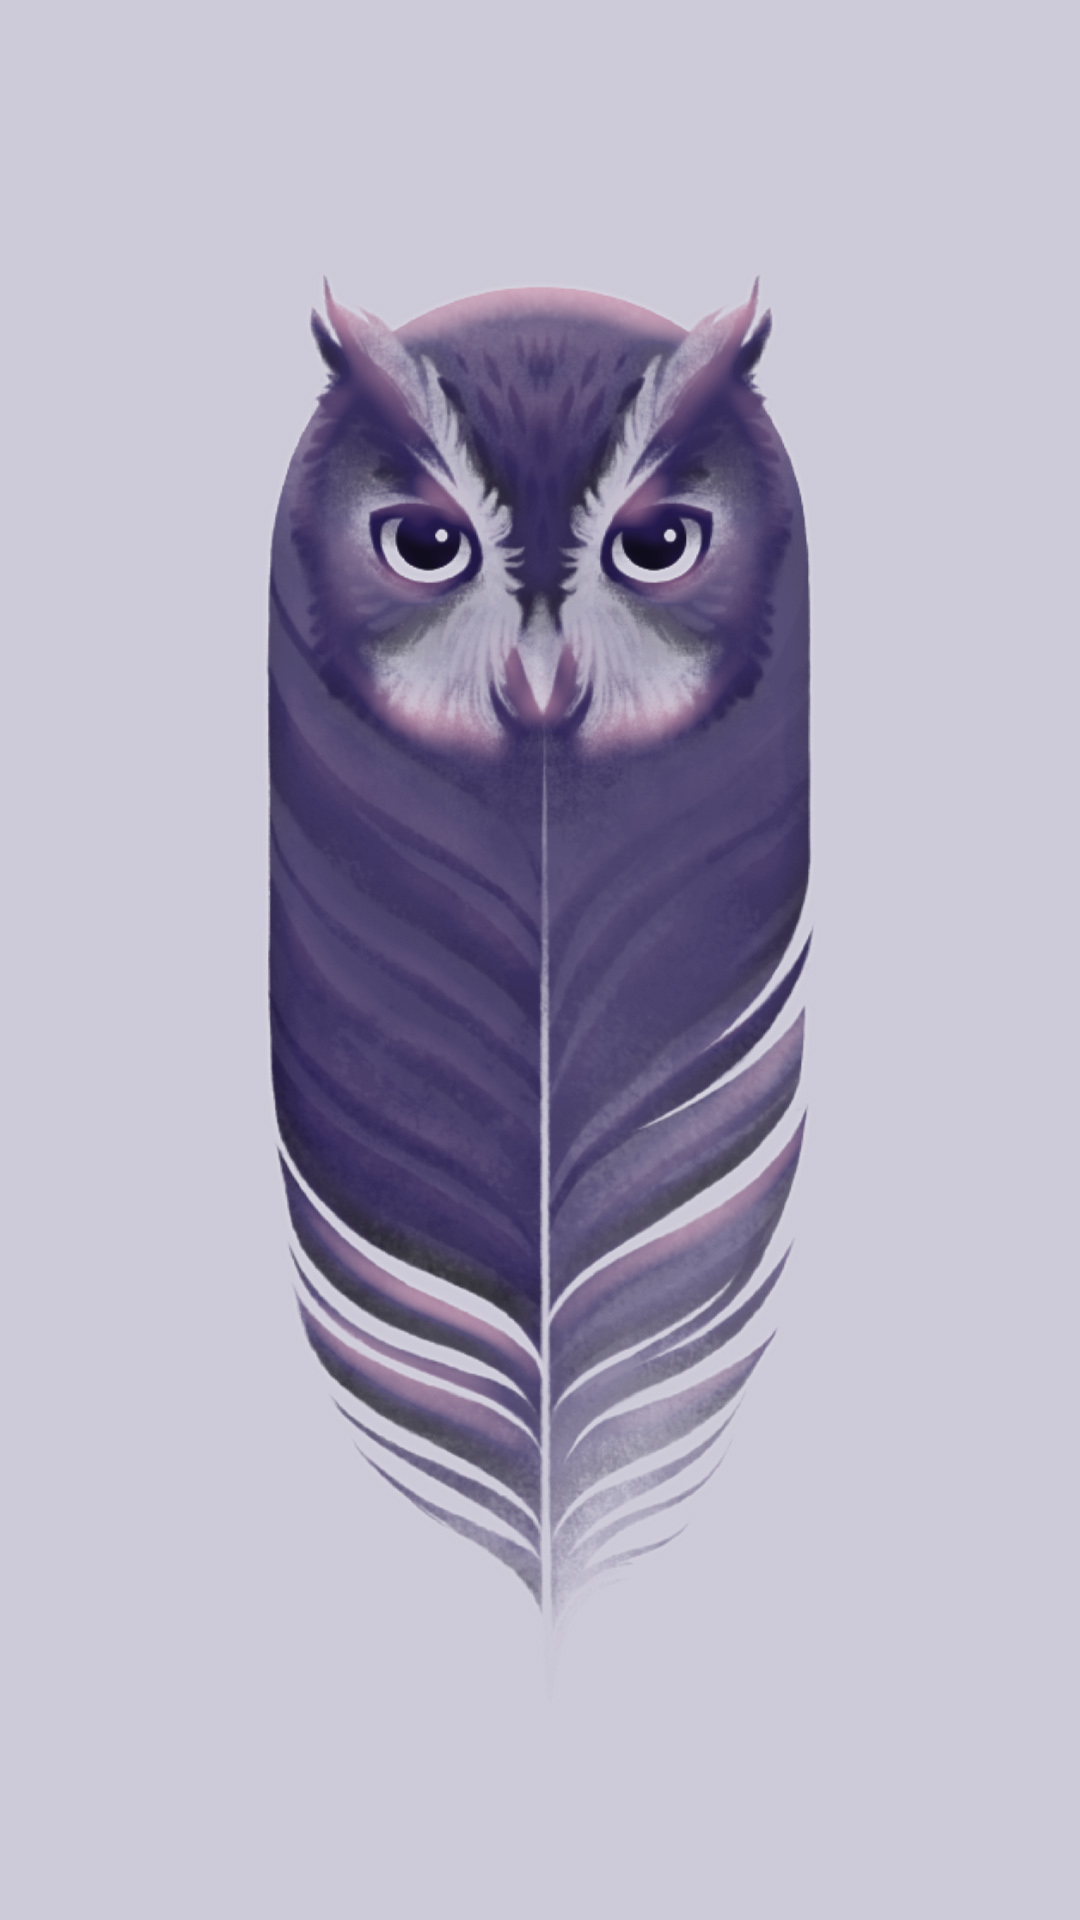 1080x1920 Owl Phone Wallpapers 70 Nice Owls For Your Smartphone